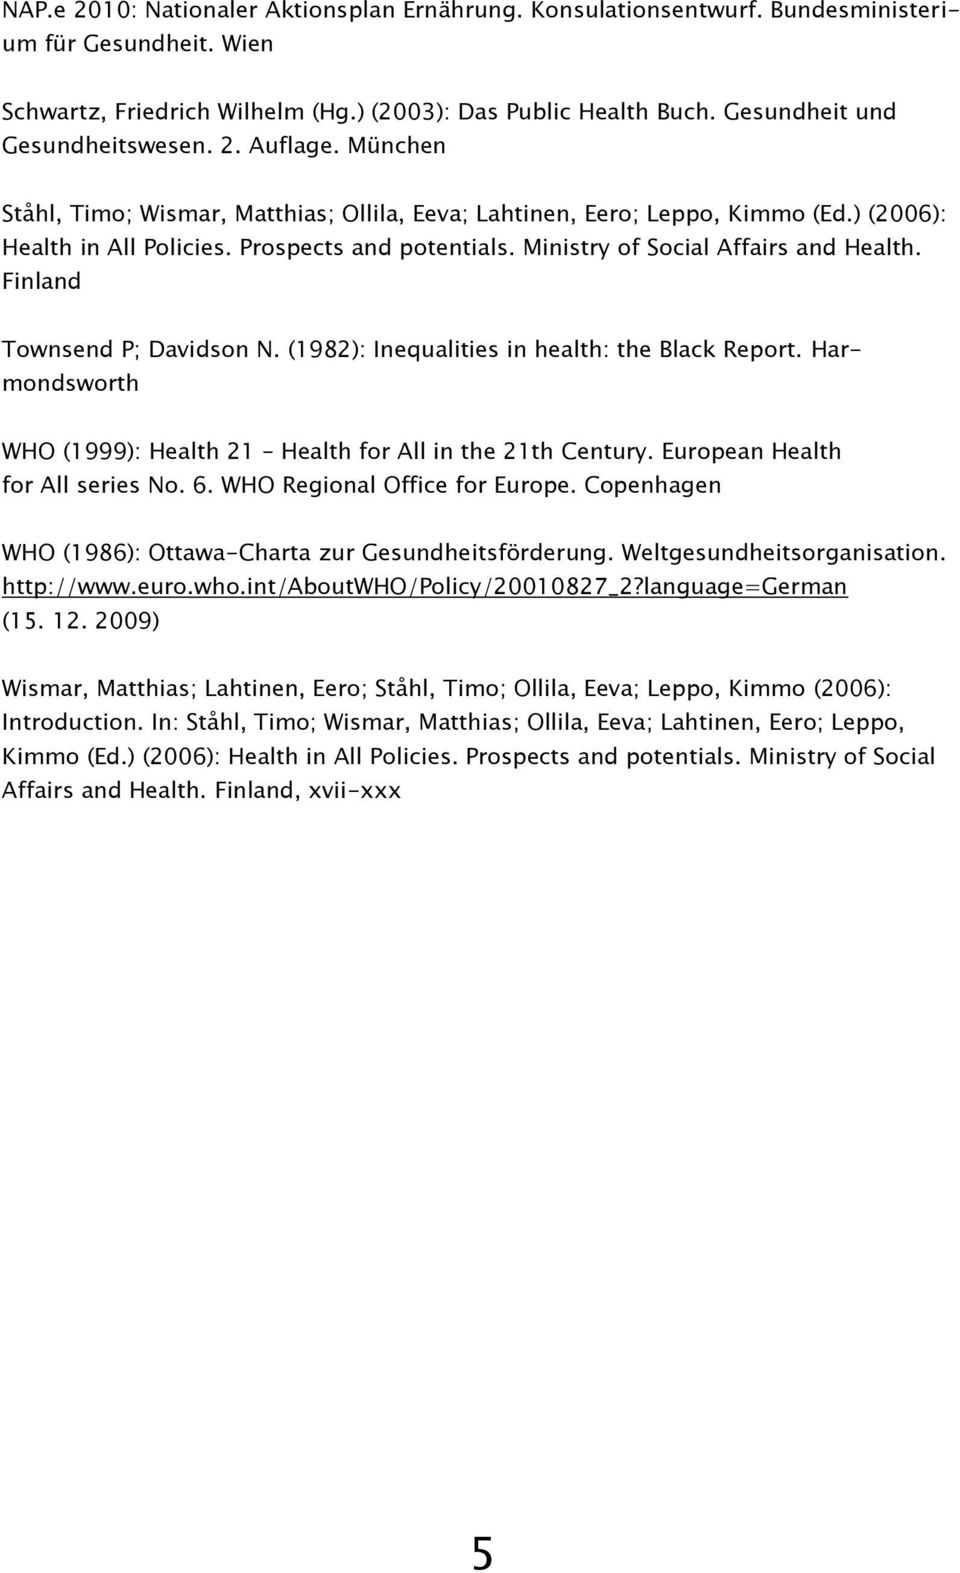 Ministry of Social Affairs and Health. Finland Townsend P; Davidson N. (1982): Inequalities in health: the Black Report. Harmondsworth WHO (1999): Health 21 Health for All in the 21th Century.